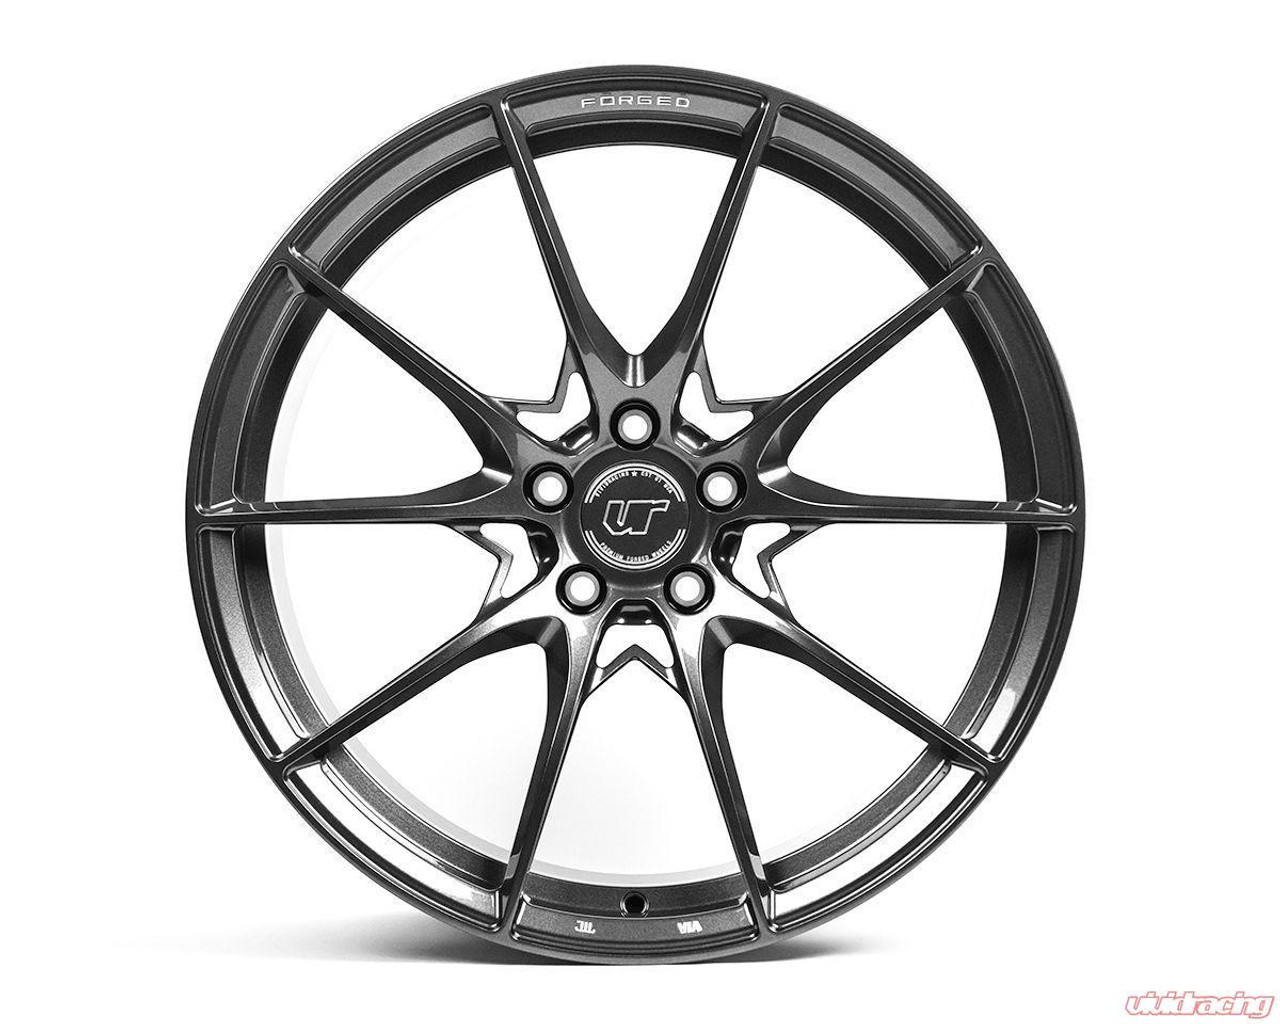 Vivid Racing VR Forged D03 Wheel Package Ford Mustang S550 20x10 & 20x11 Gunmetal - VRF-D03-S550-GM 